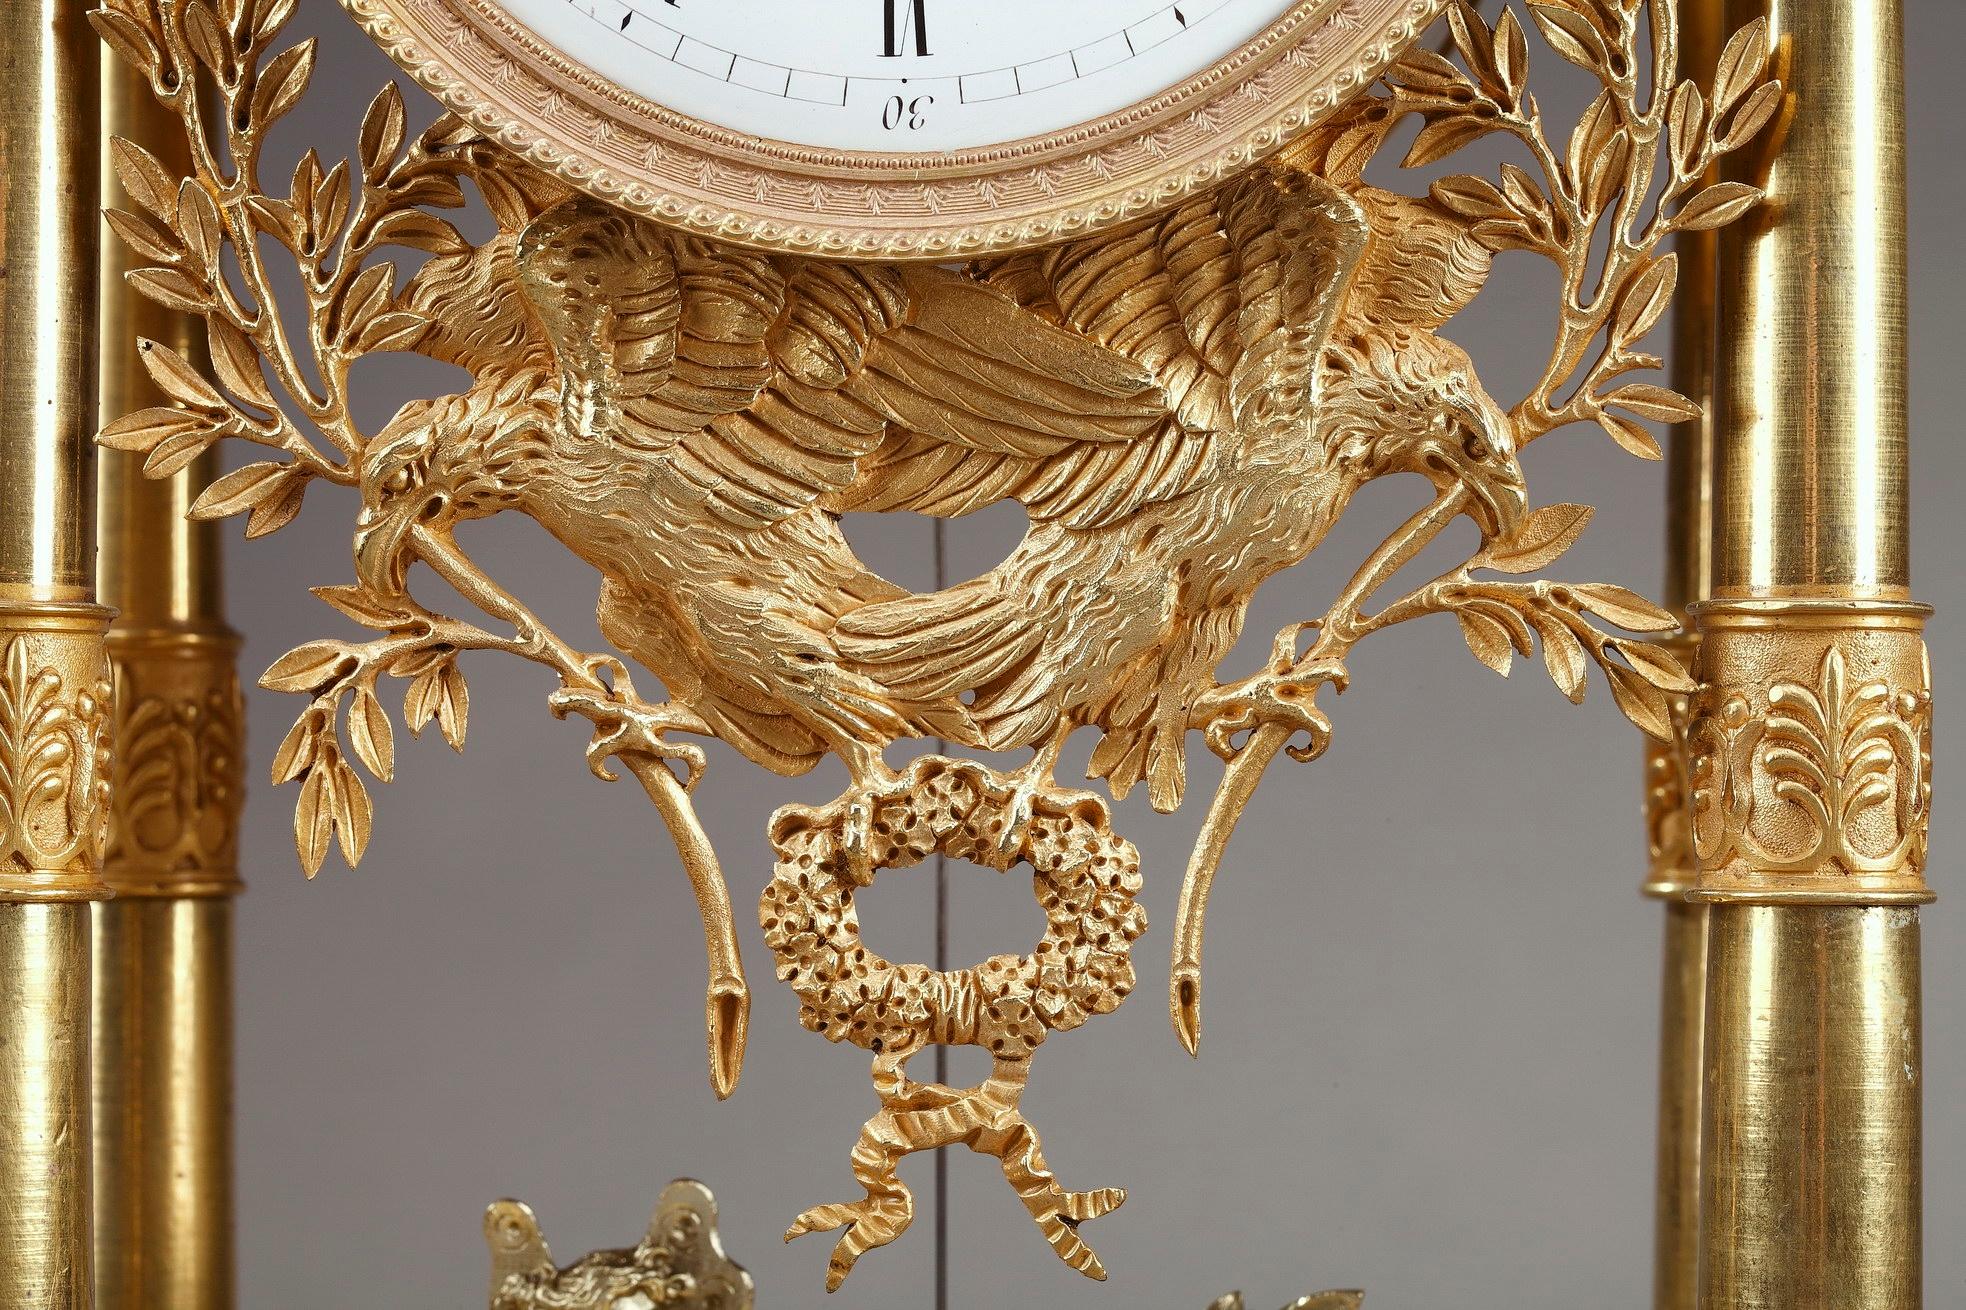 Empire mantel clock in ormolu, or gilt bronze, designed as a portico, with four columns decorated with foliage and palmette. The columns support the entablature embellished with Pegasus and topped by a putto sculpting an antique bust. The dial with